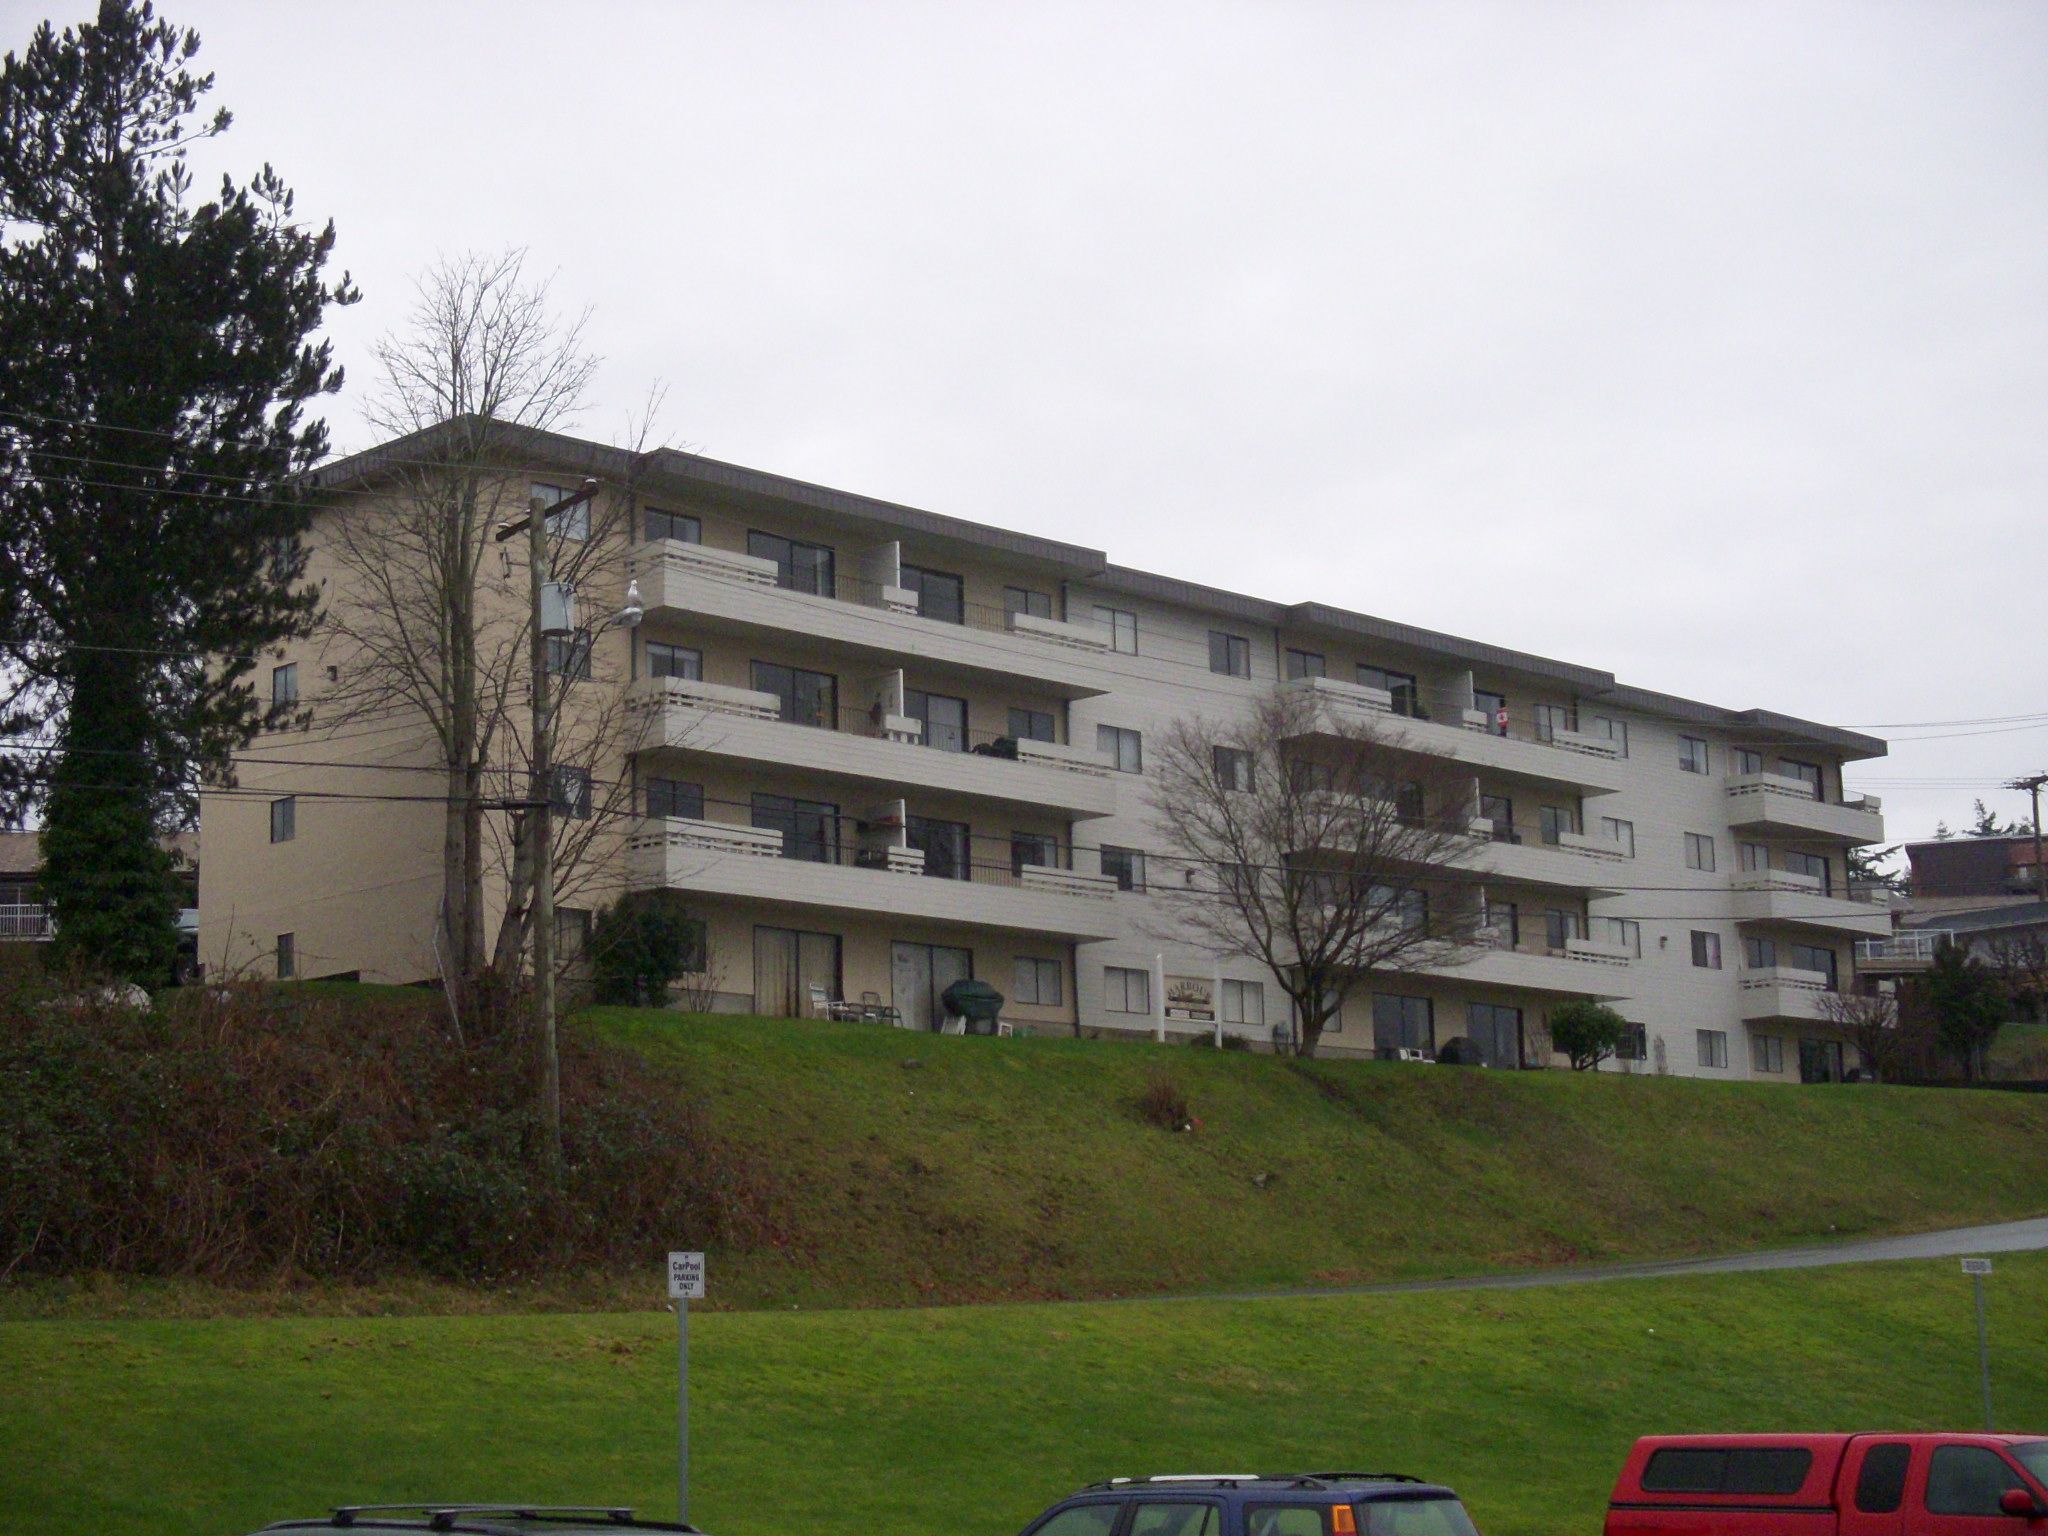 Main Photo: 451 9TH Avenue in Campbell River: Campbell River Central Multifamily for sale